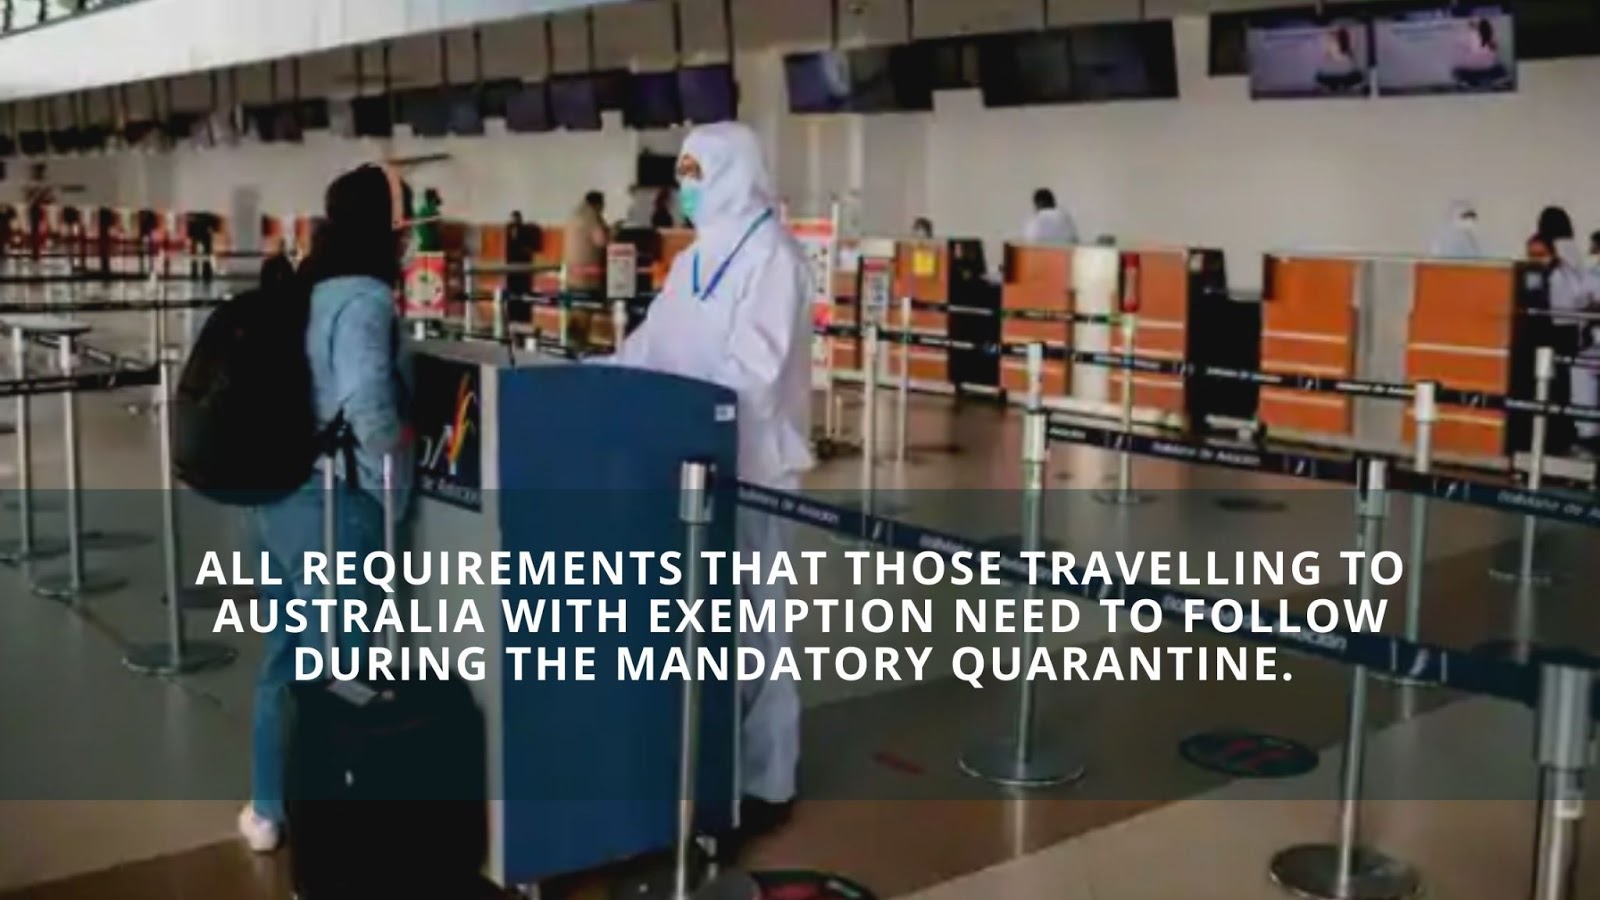 All Requirements that Those Travelling to Australia with Exemption Need to Follow During the Mandatory Quarantine.